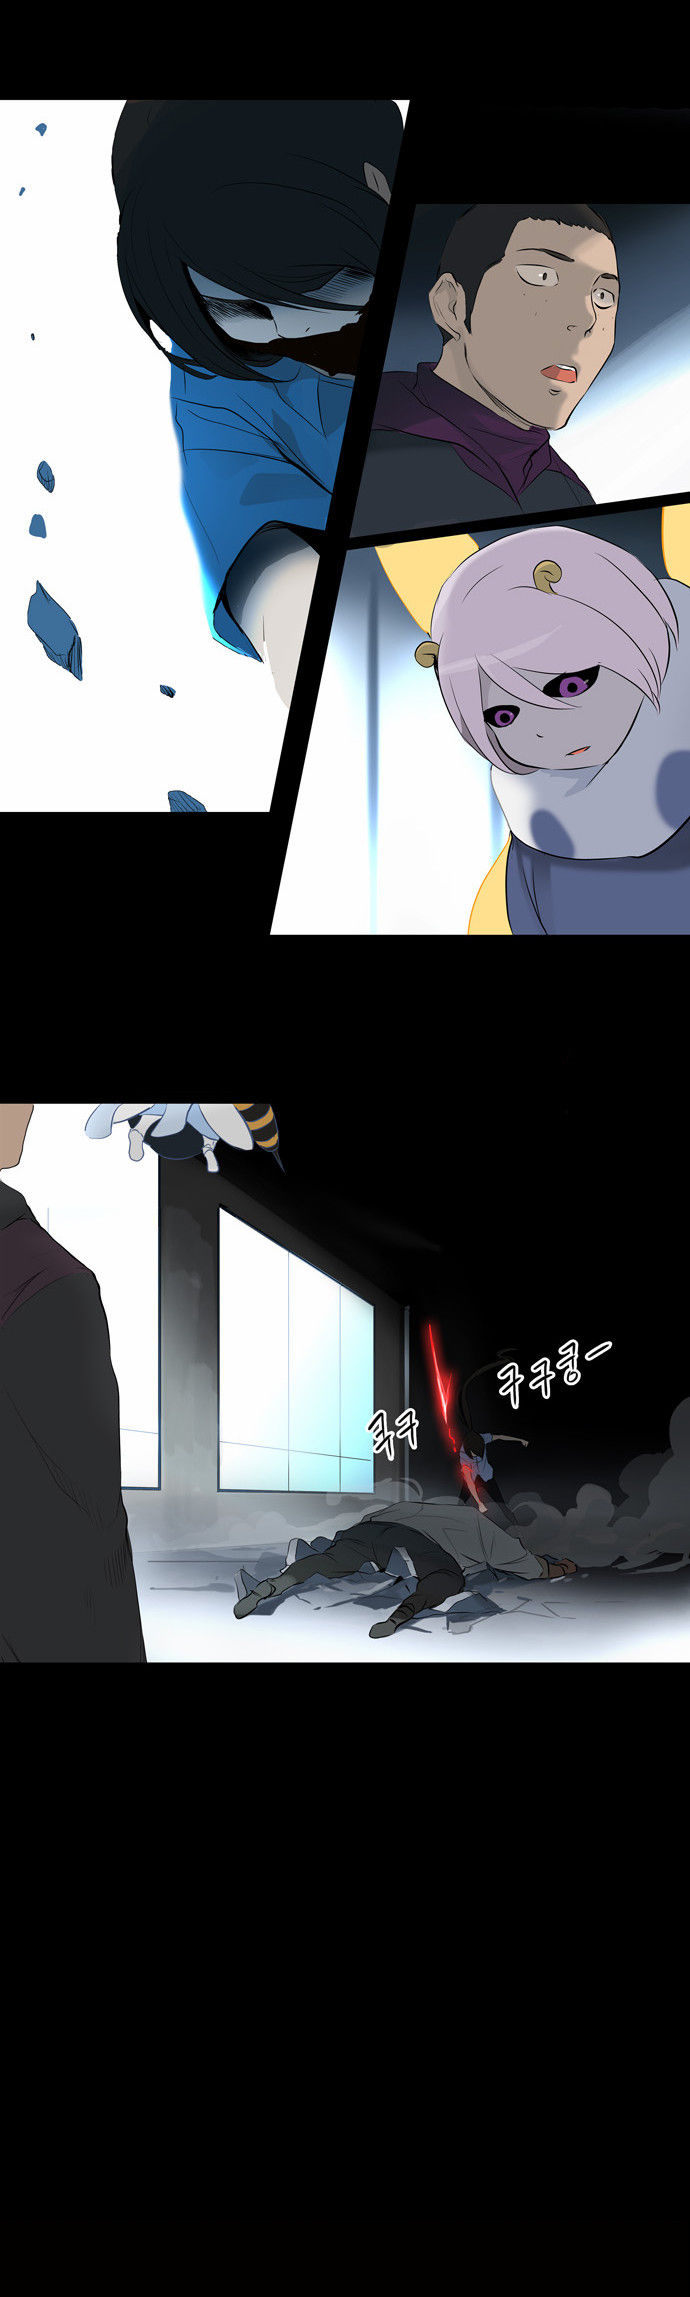 Tower of God 144